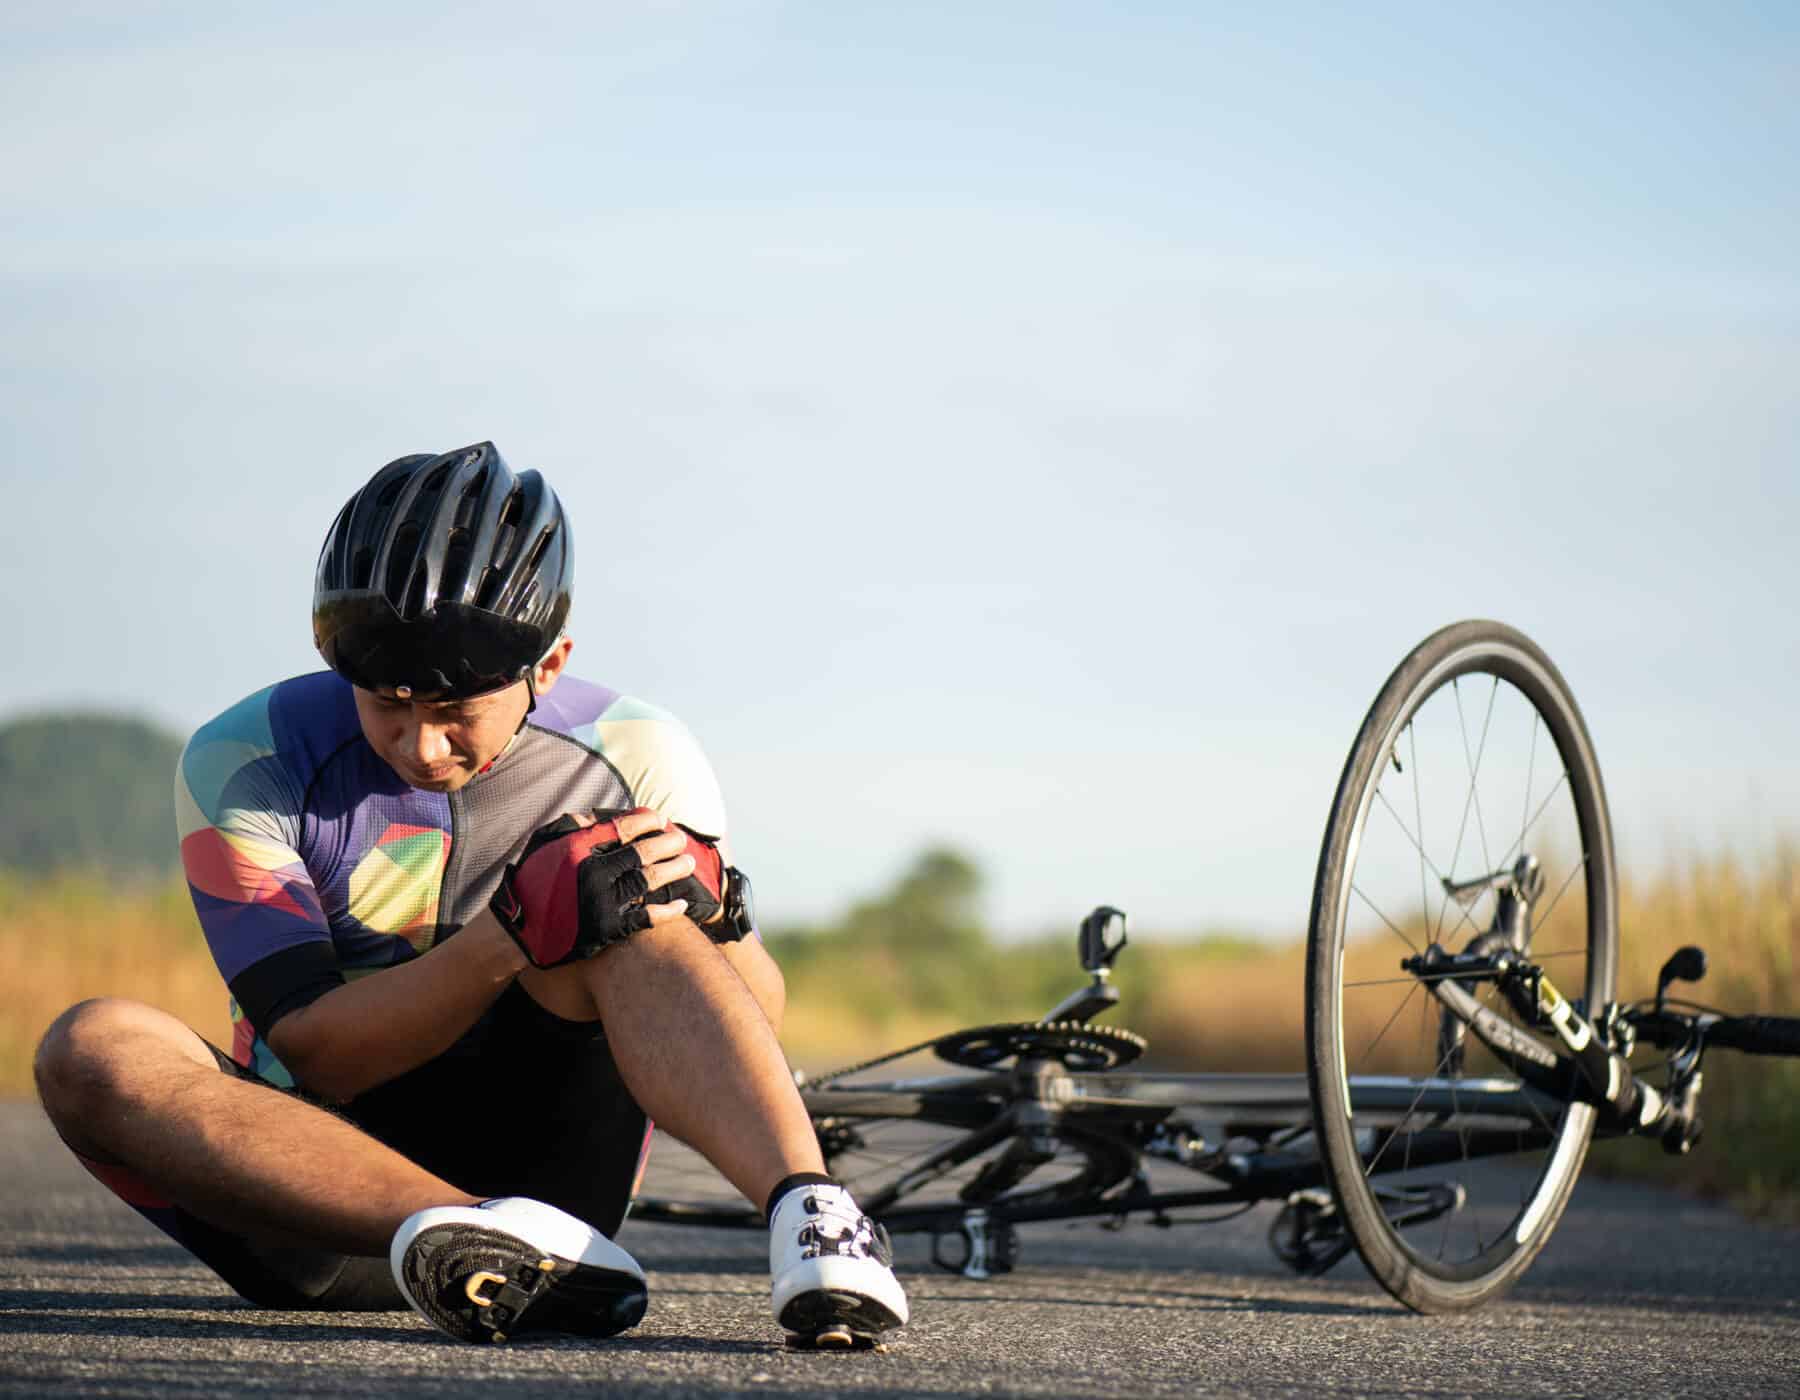 Bicycle accident person sitting on ground with helmet holding knee